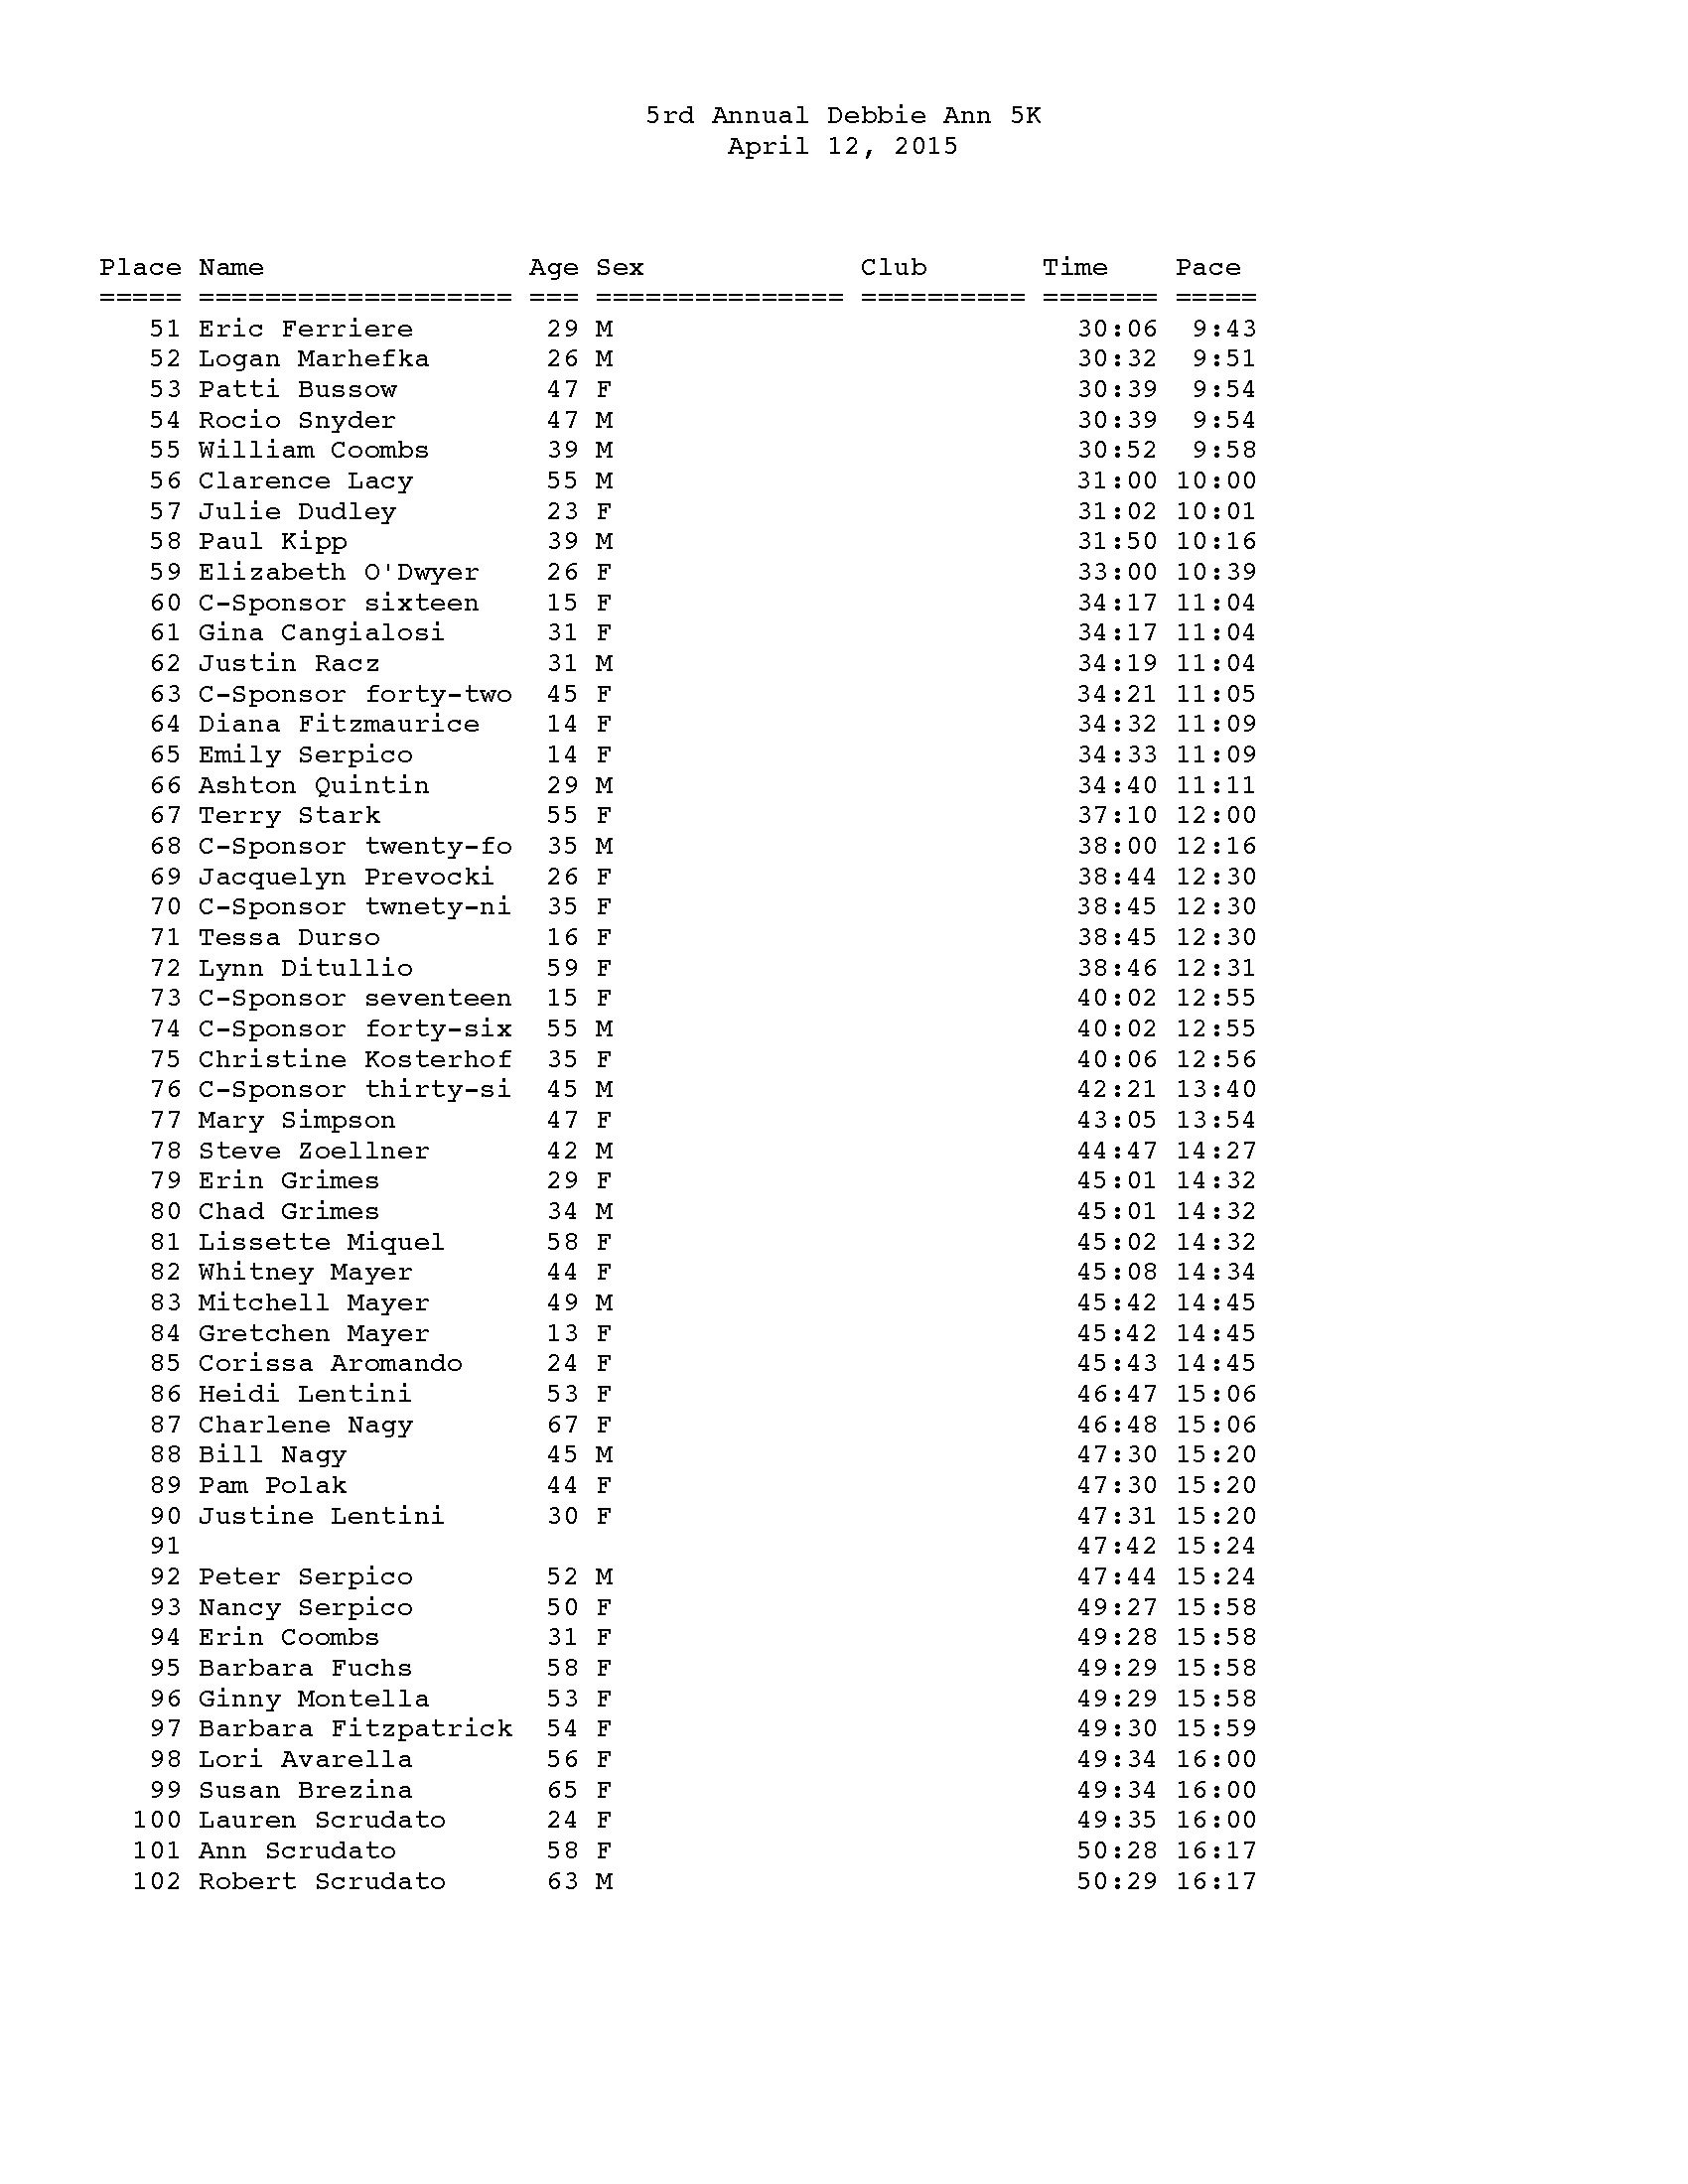 5th Debbie Ann Overall Results_Page_2.jpg